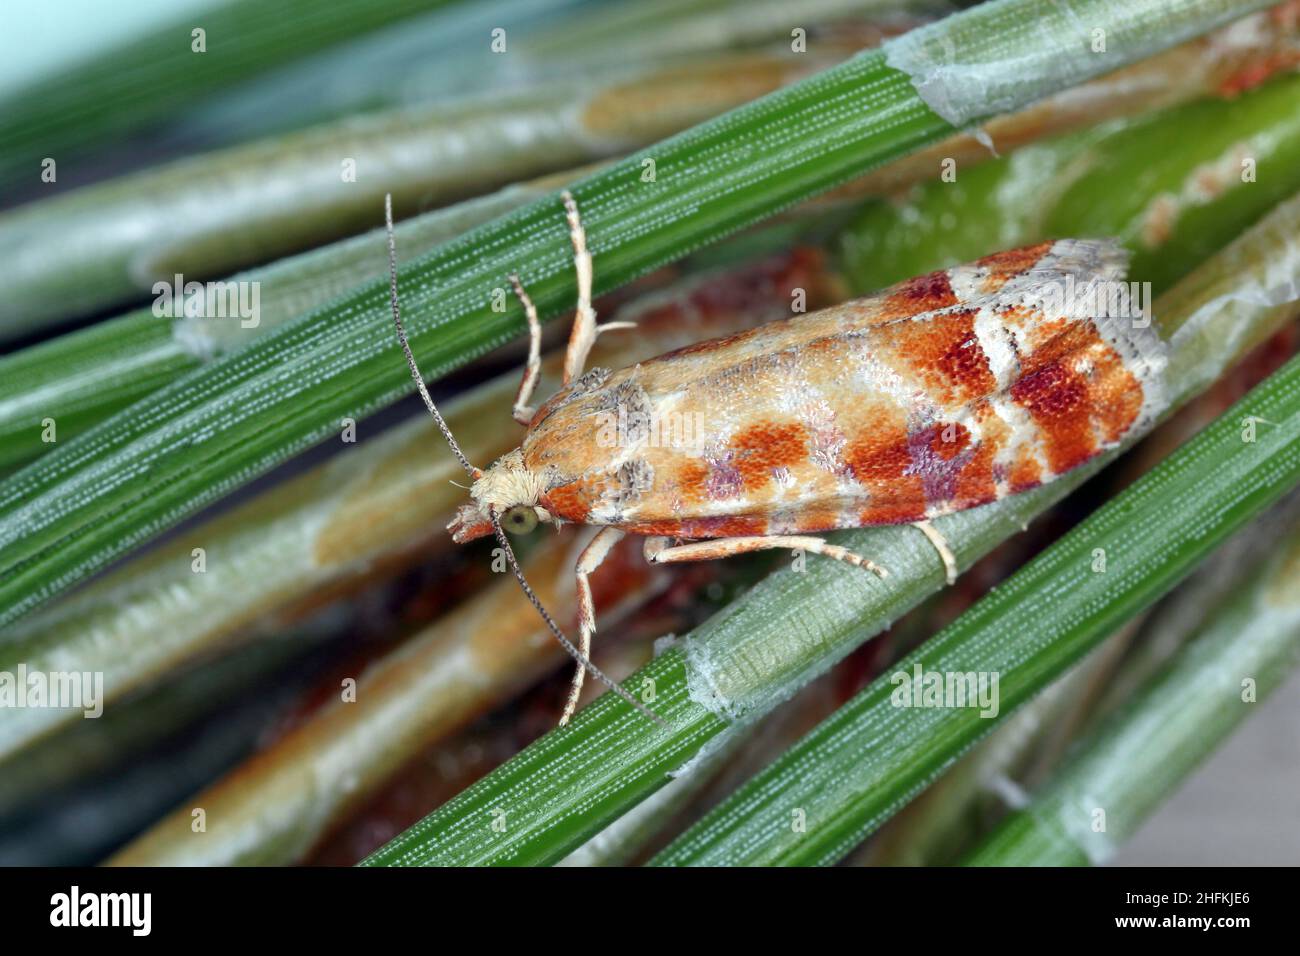 Rhyacionia buoliana, the pine shoot moth, is a moth of the family Tortricidae. The larvae feed on young pine shoots. It is a dangerous pest in forests Stock Photo